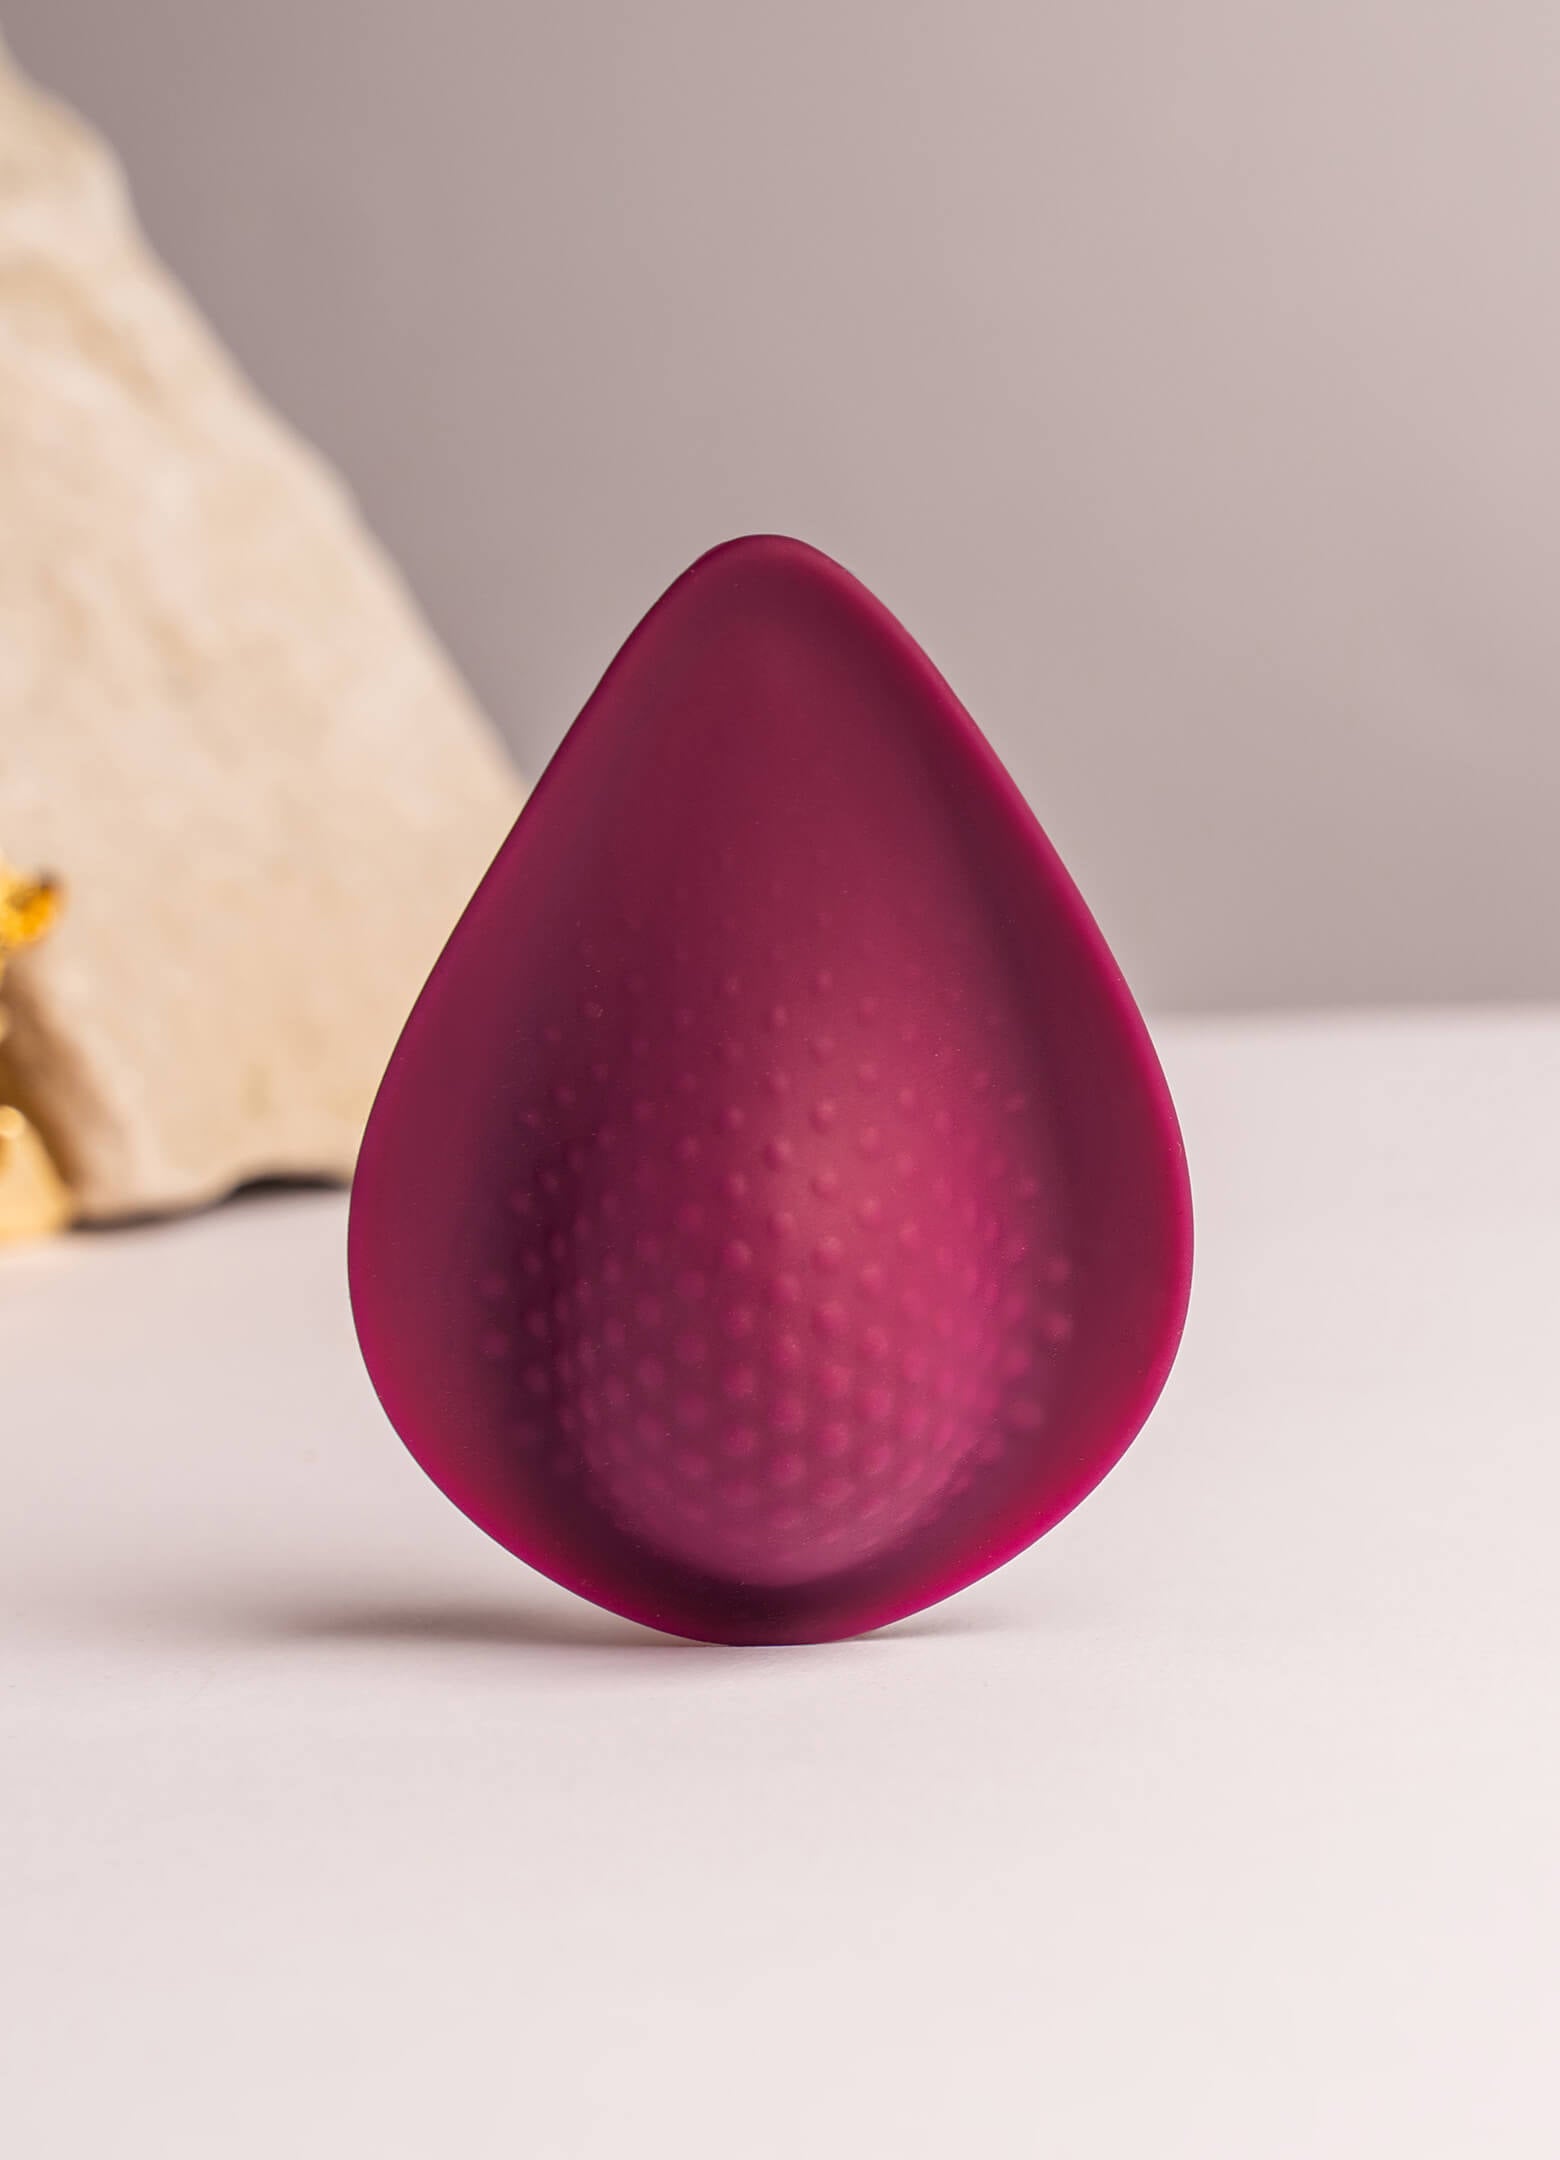 Discreet tear drop shaped silicone panty vibe in burgundy.